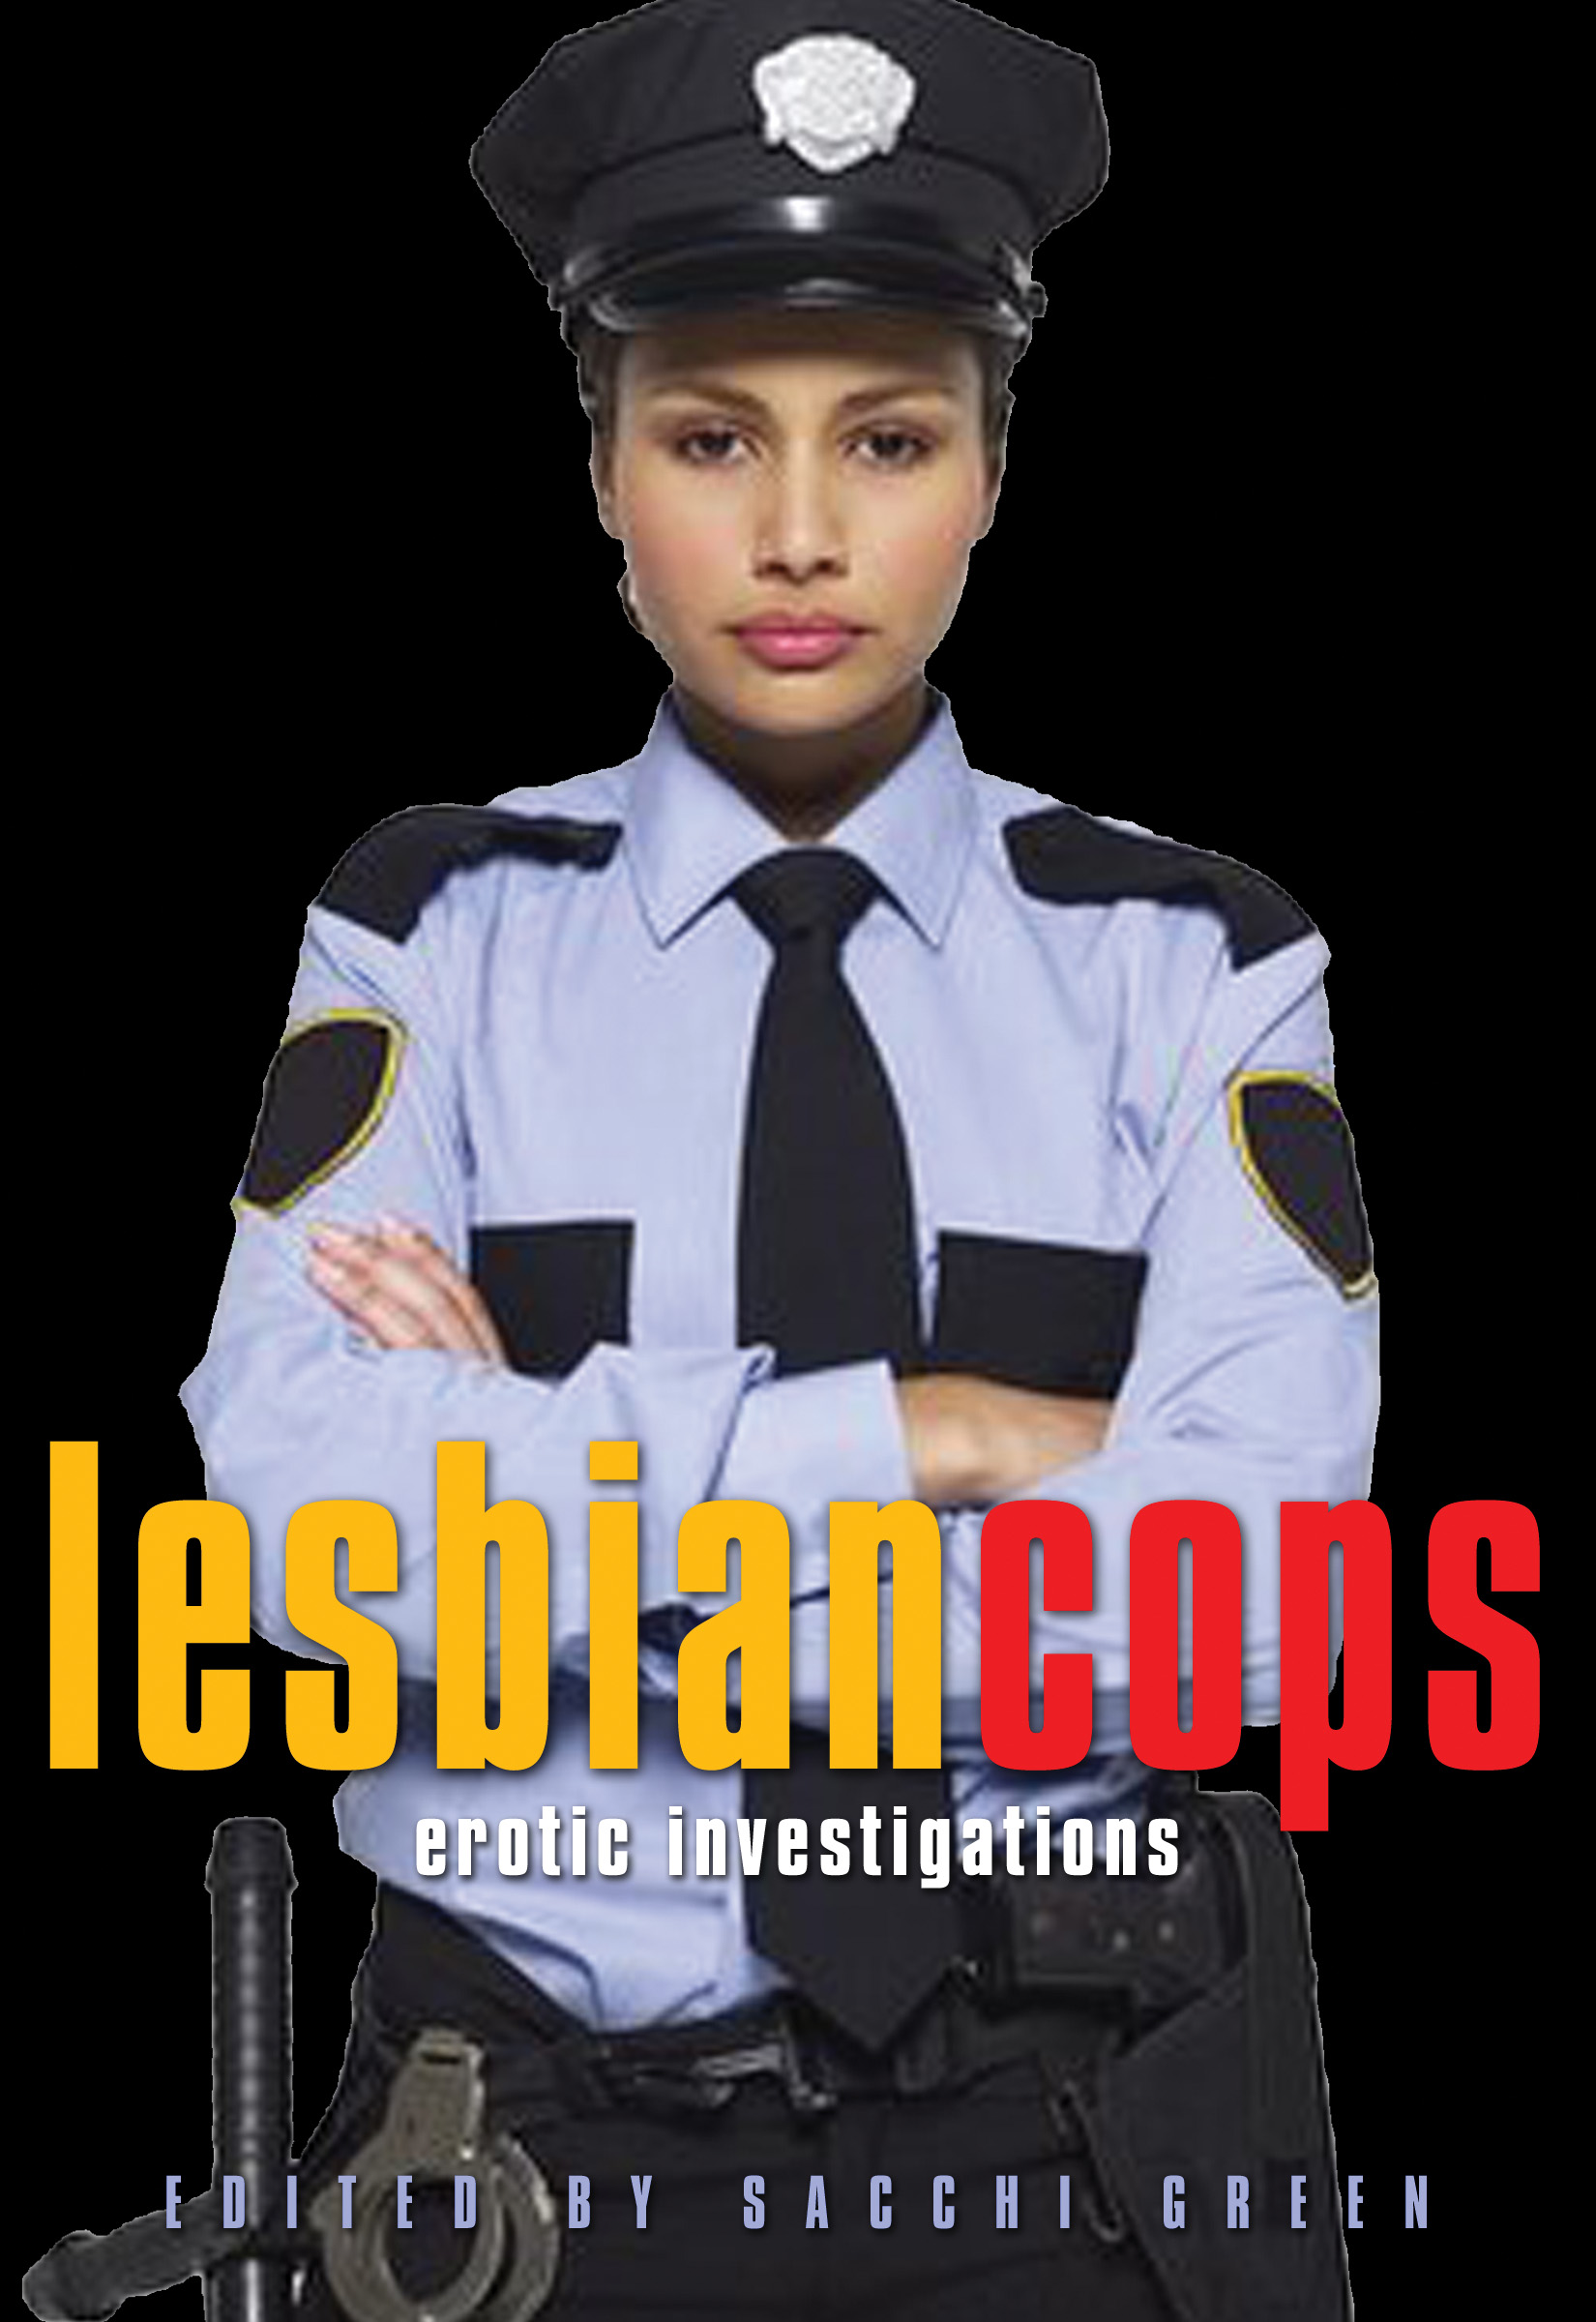 Excited Lesbo Cops